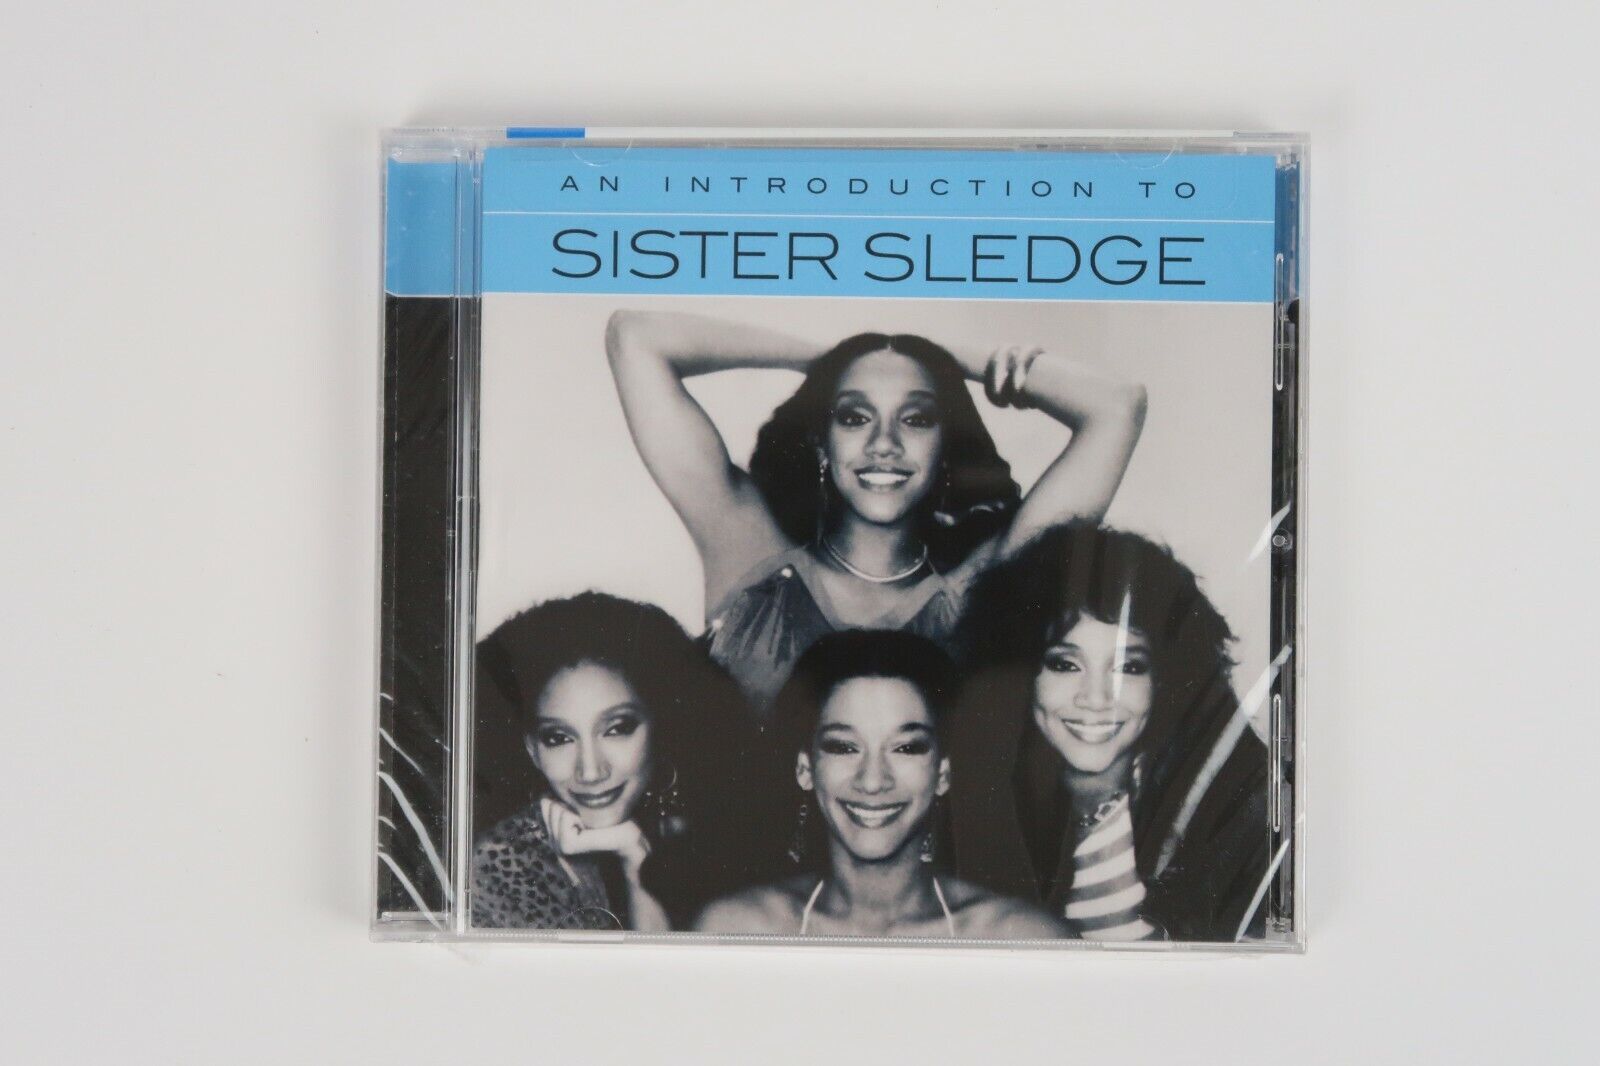  An Introduction To Sister Sledge by Sister Sledge (CD, 2018) *New Sealed